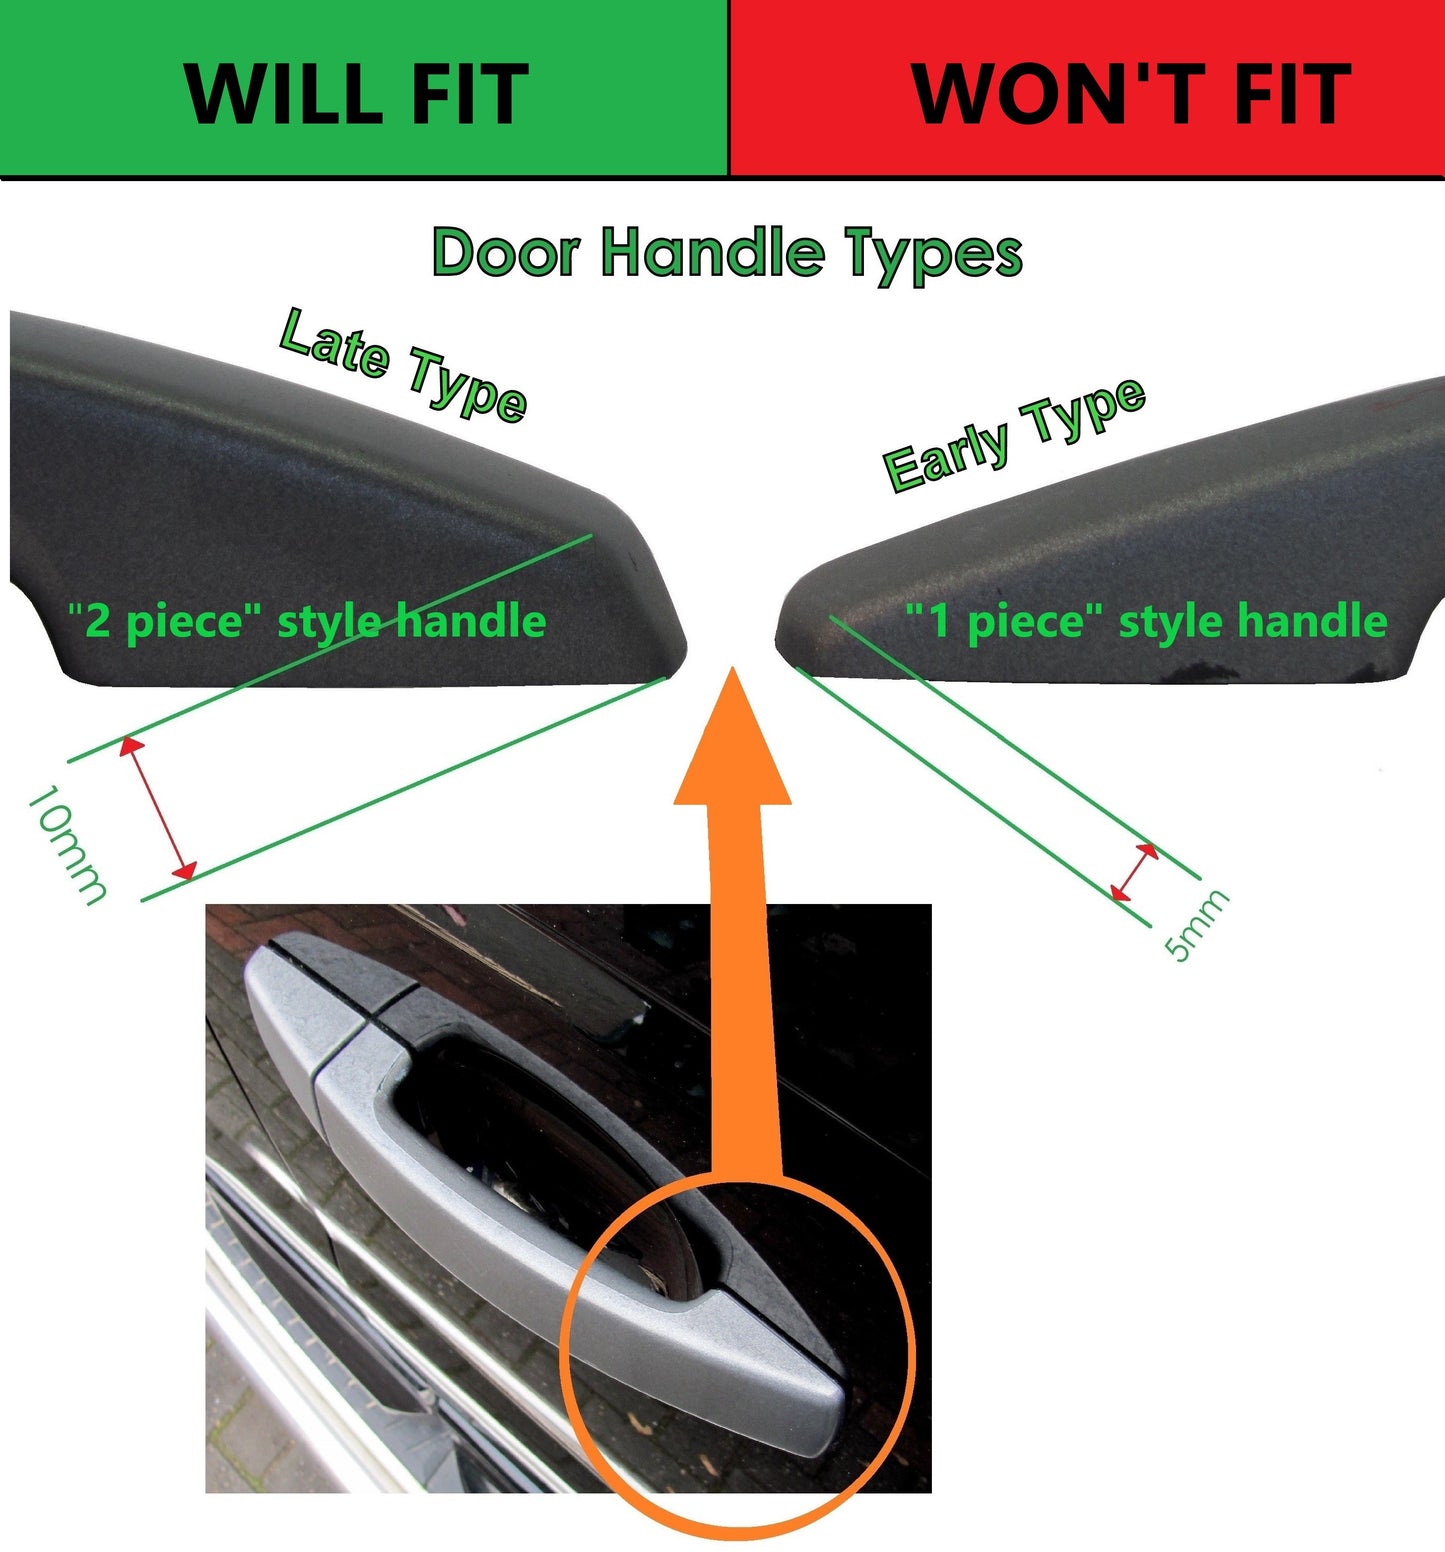 Door Handle "Skins" for Land Rover Freelander 2 fitted with 2 pc Handle - Matt Black